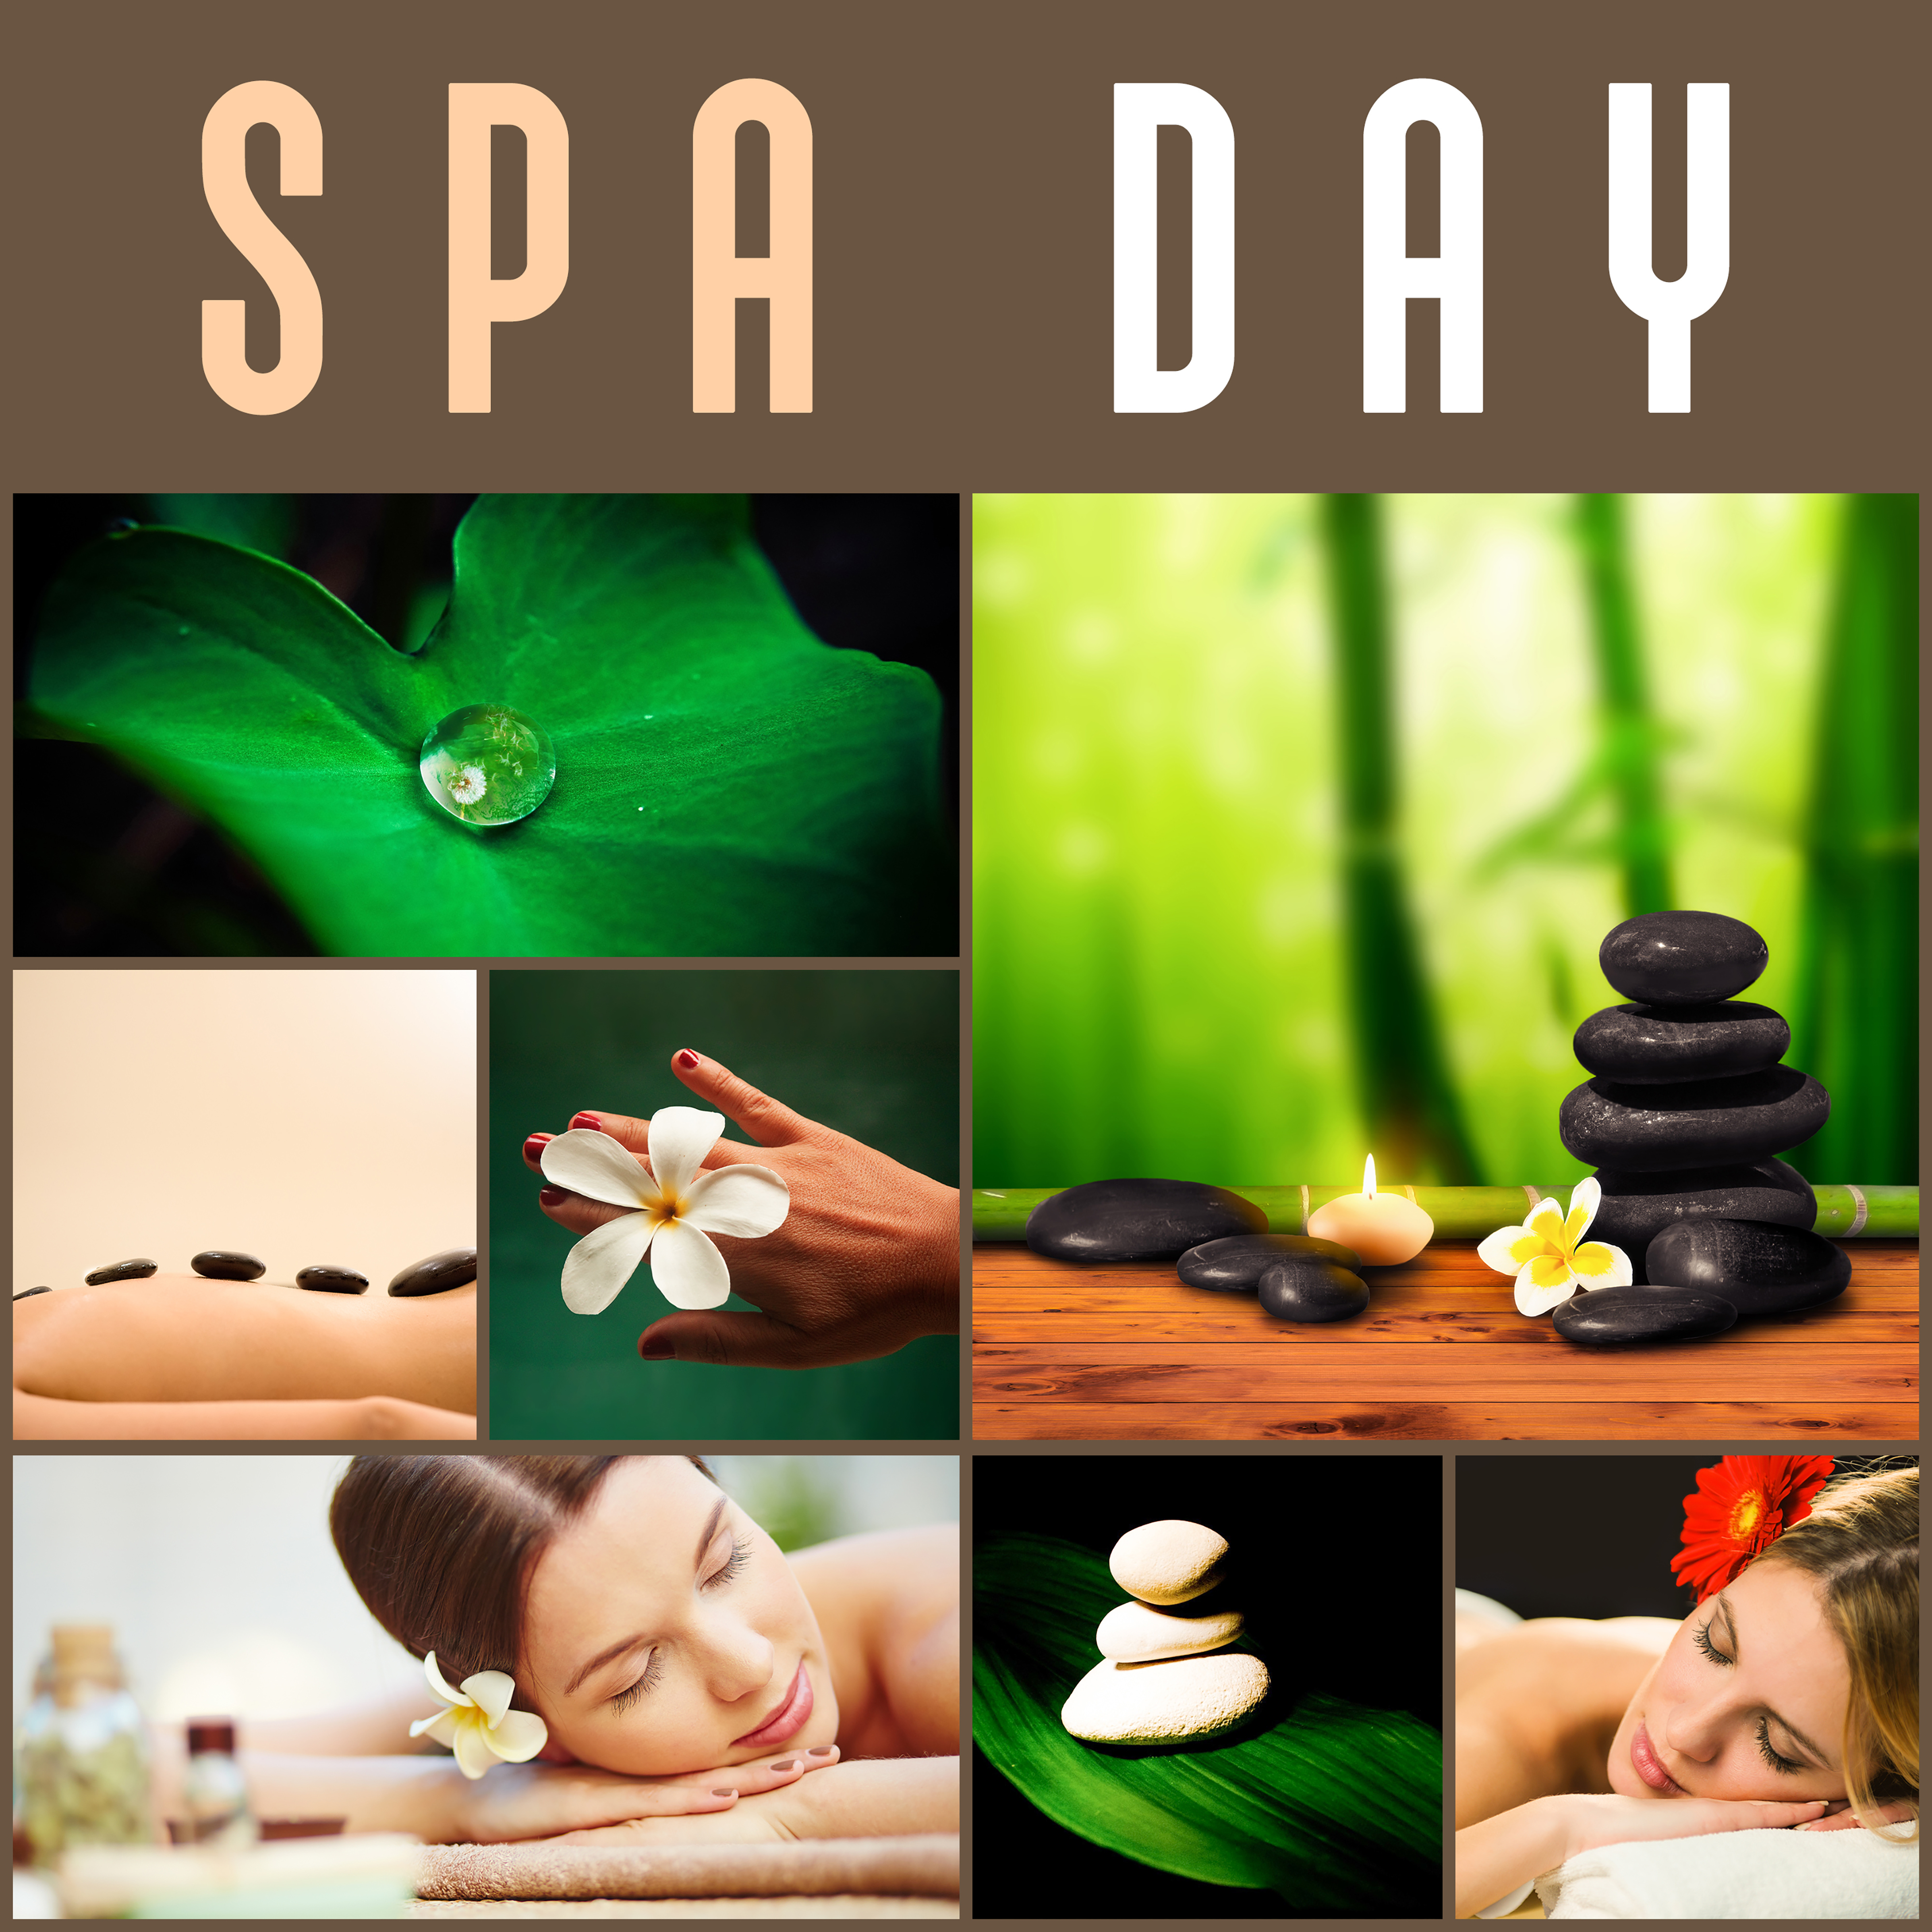 Spa Day – Peaceful New Age, Spa Music, Spa Hotel, Healing Sounds of Nature for Deep Relaxing, Spa Massage Music, Spa Music